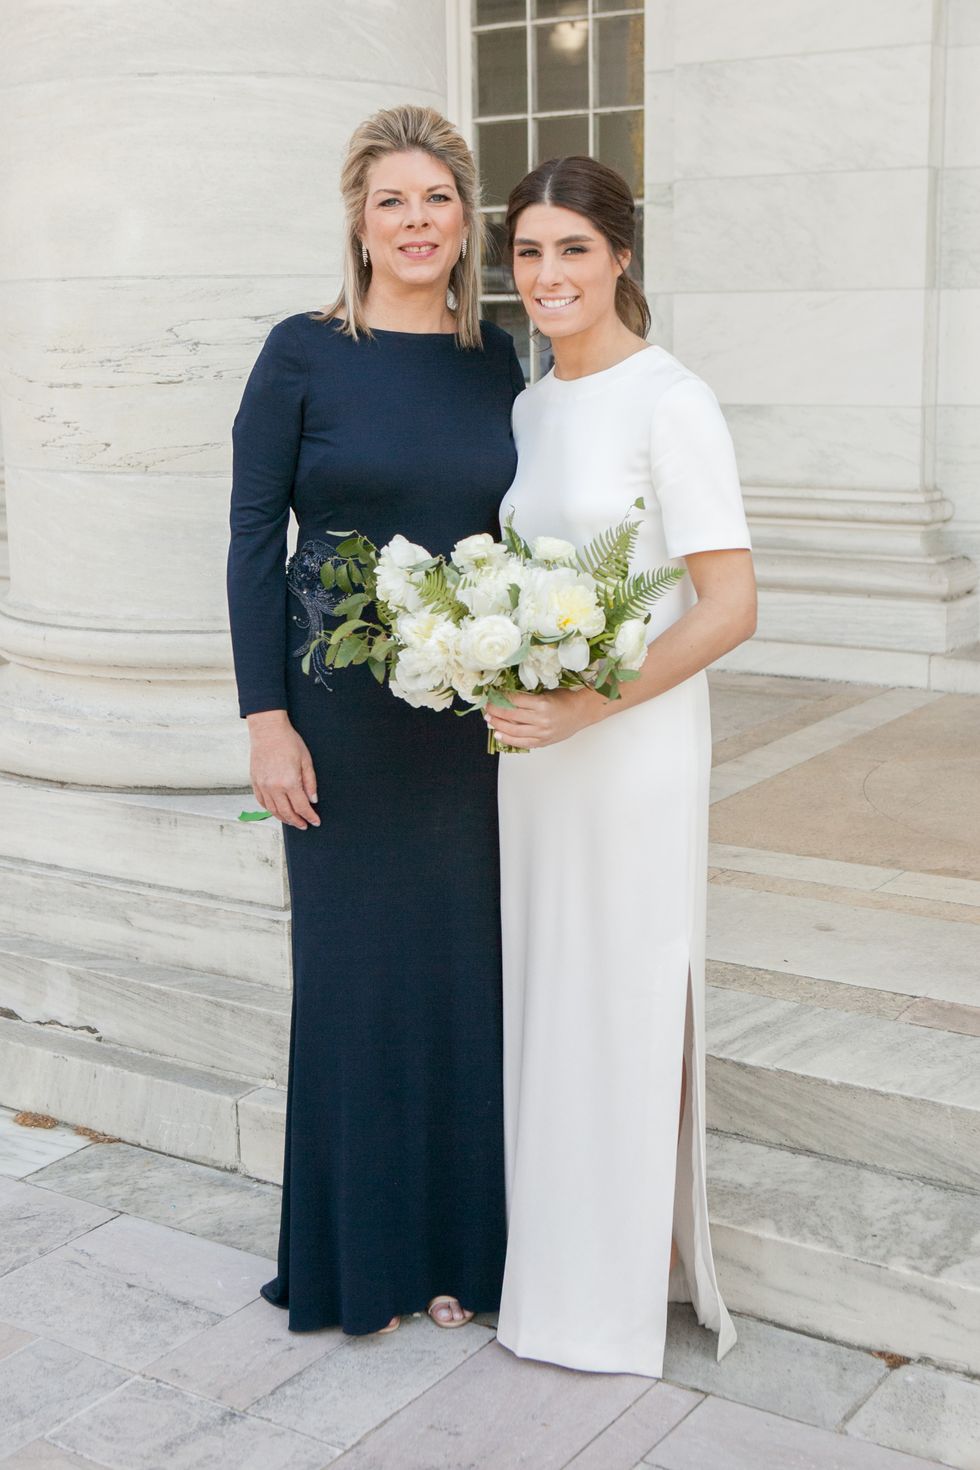 <p>Arielle and her mother, dressed in <a href="http://www.badgleymischka.com/" target="_blank" tabindex="-1">Badgley Mischka</a>, took photos at DAR. "My mom has always been my biggest supporter," said the bride. "Throughout the months leading up to the wedding, she kept assuring me that I needed to choose what I liked and not to worry about what anyone else thought. Even though that was really difficult for me, I think it's probably something that everyone goes through and it was advice I stuck to."</p>